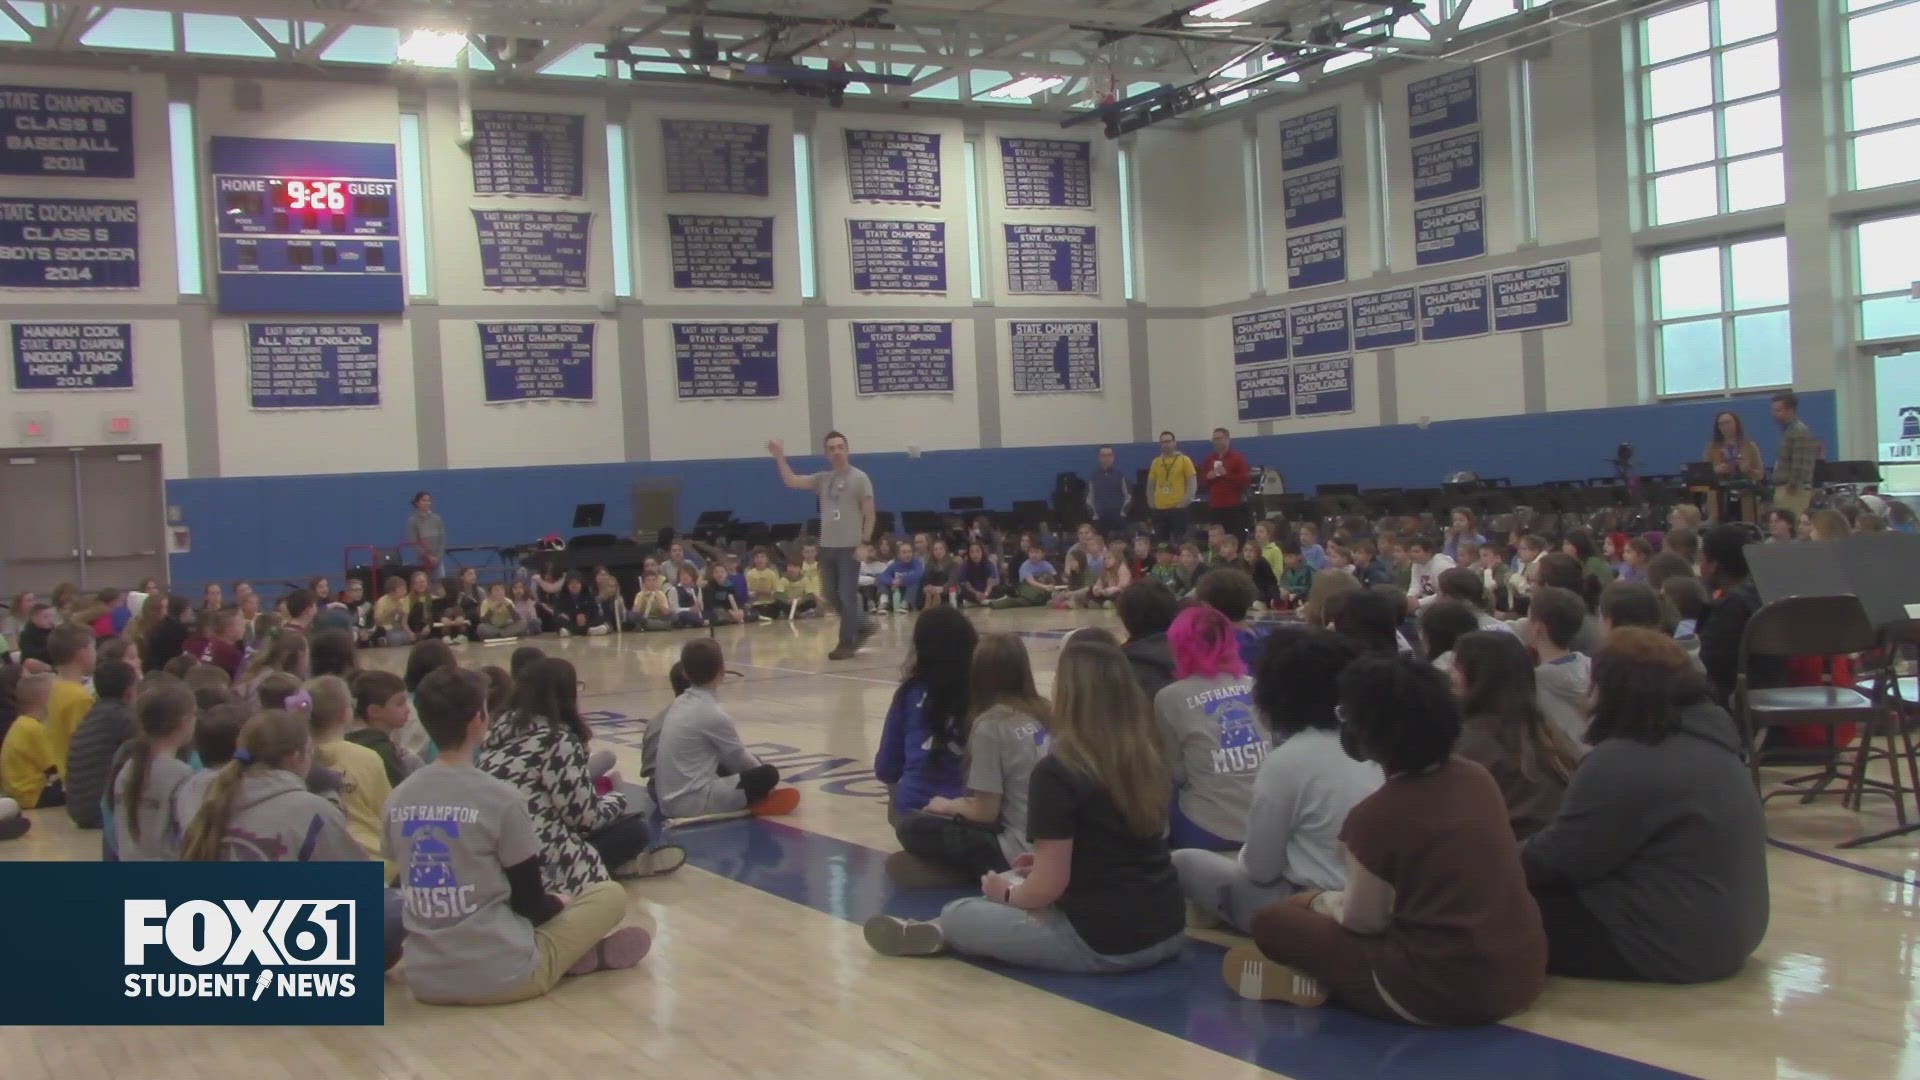 Over 500 students, staff, and administrators filled the high school gym.